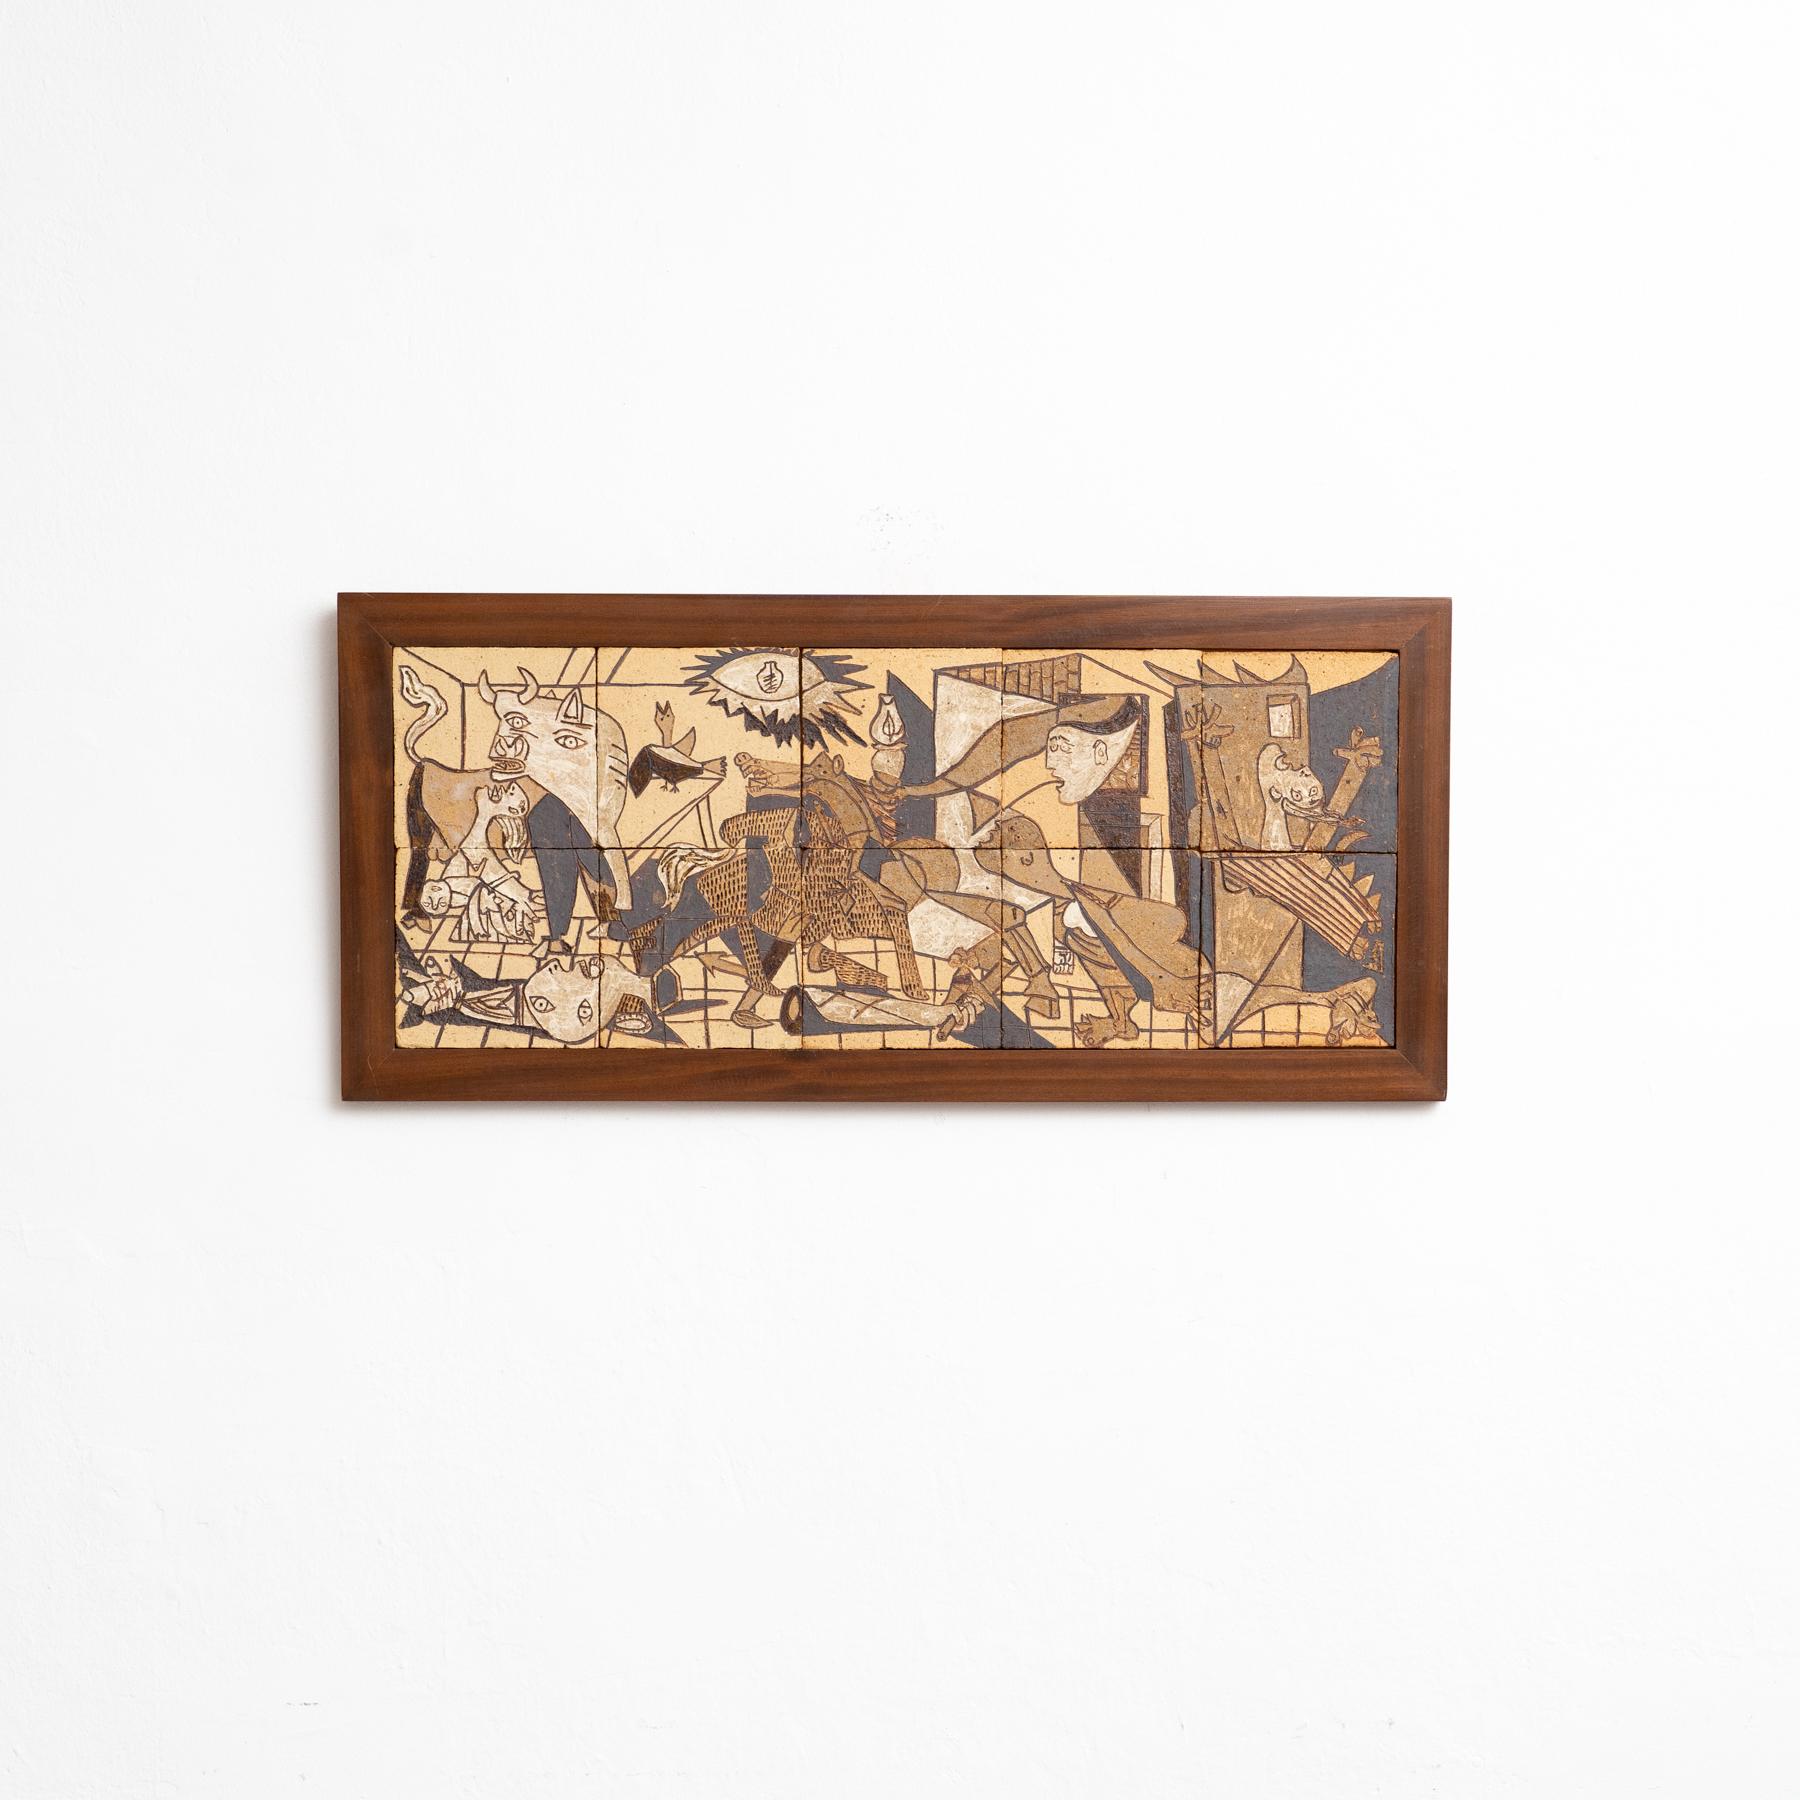 Eternal Echoes: A Ceramic Tribute to Picasso's Guernika, circa 1960

Circa 1960
Spain origin
Framed in wood
Ten ceramic tiles
Earth tones
102.5 cm (W) x 47 cm (H) x 2.5 cm (D)

Step into a realm where history and art converge, where the haunting